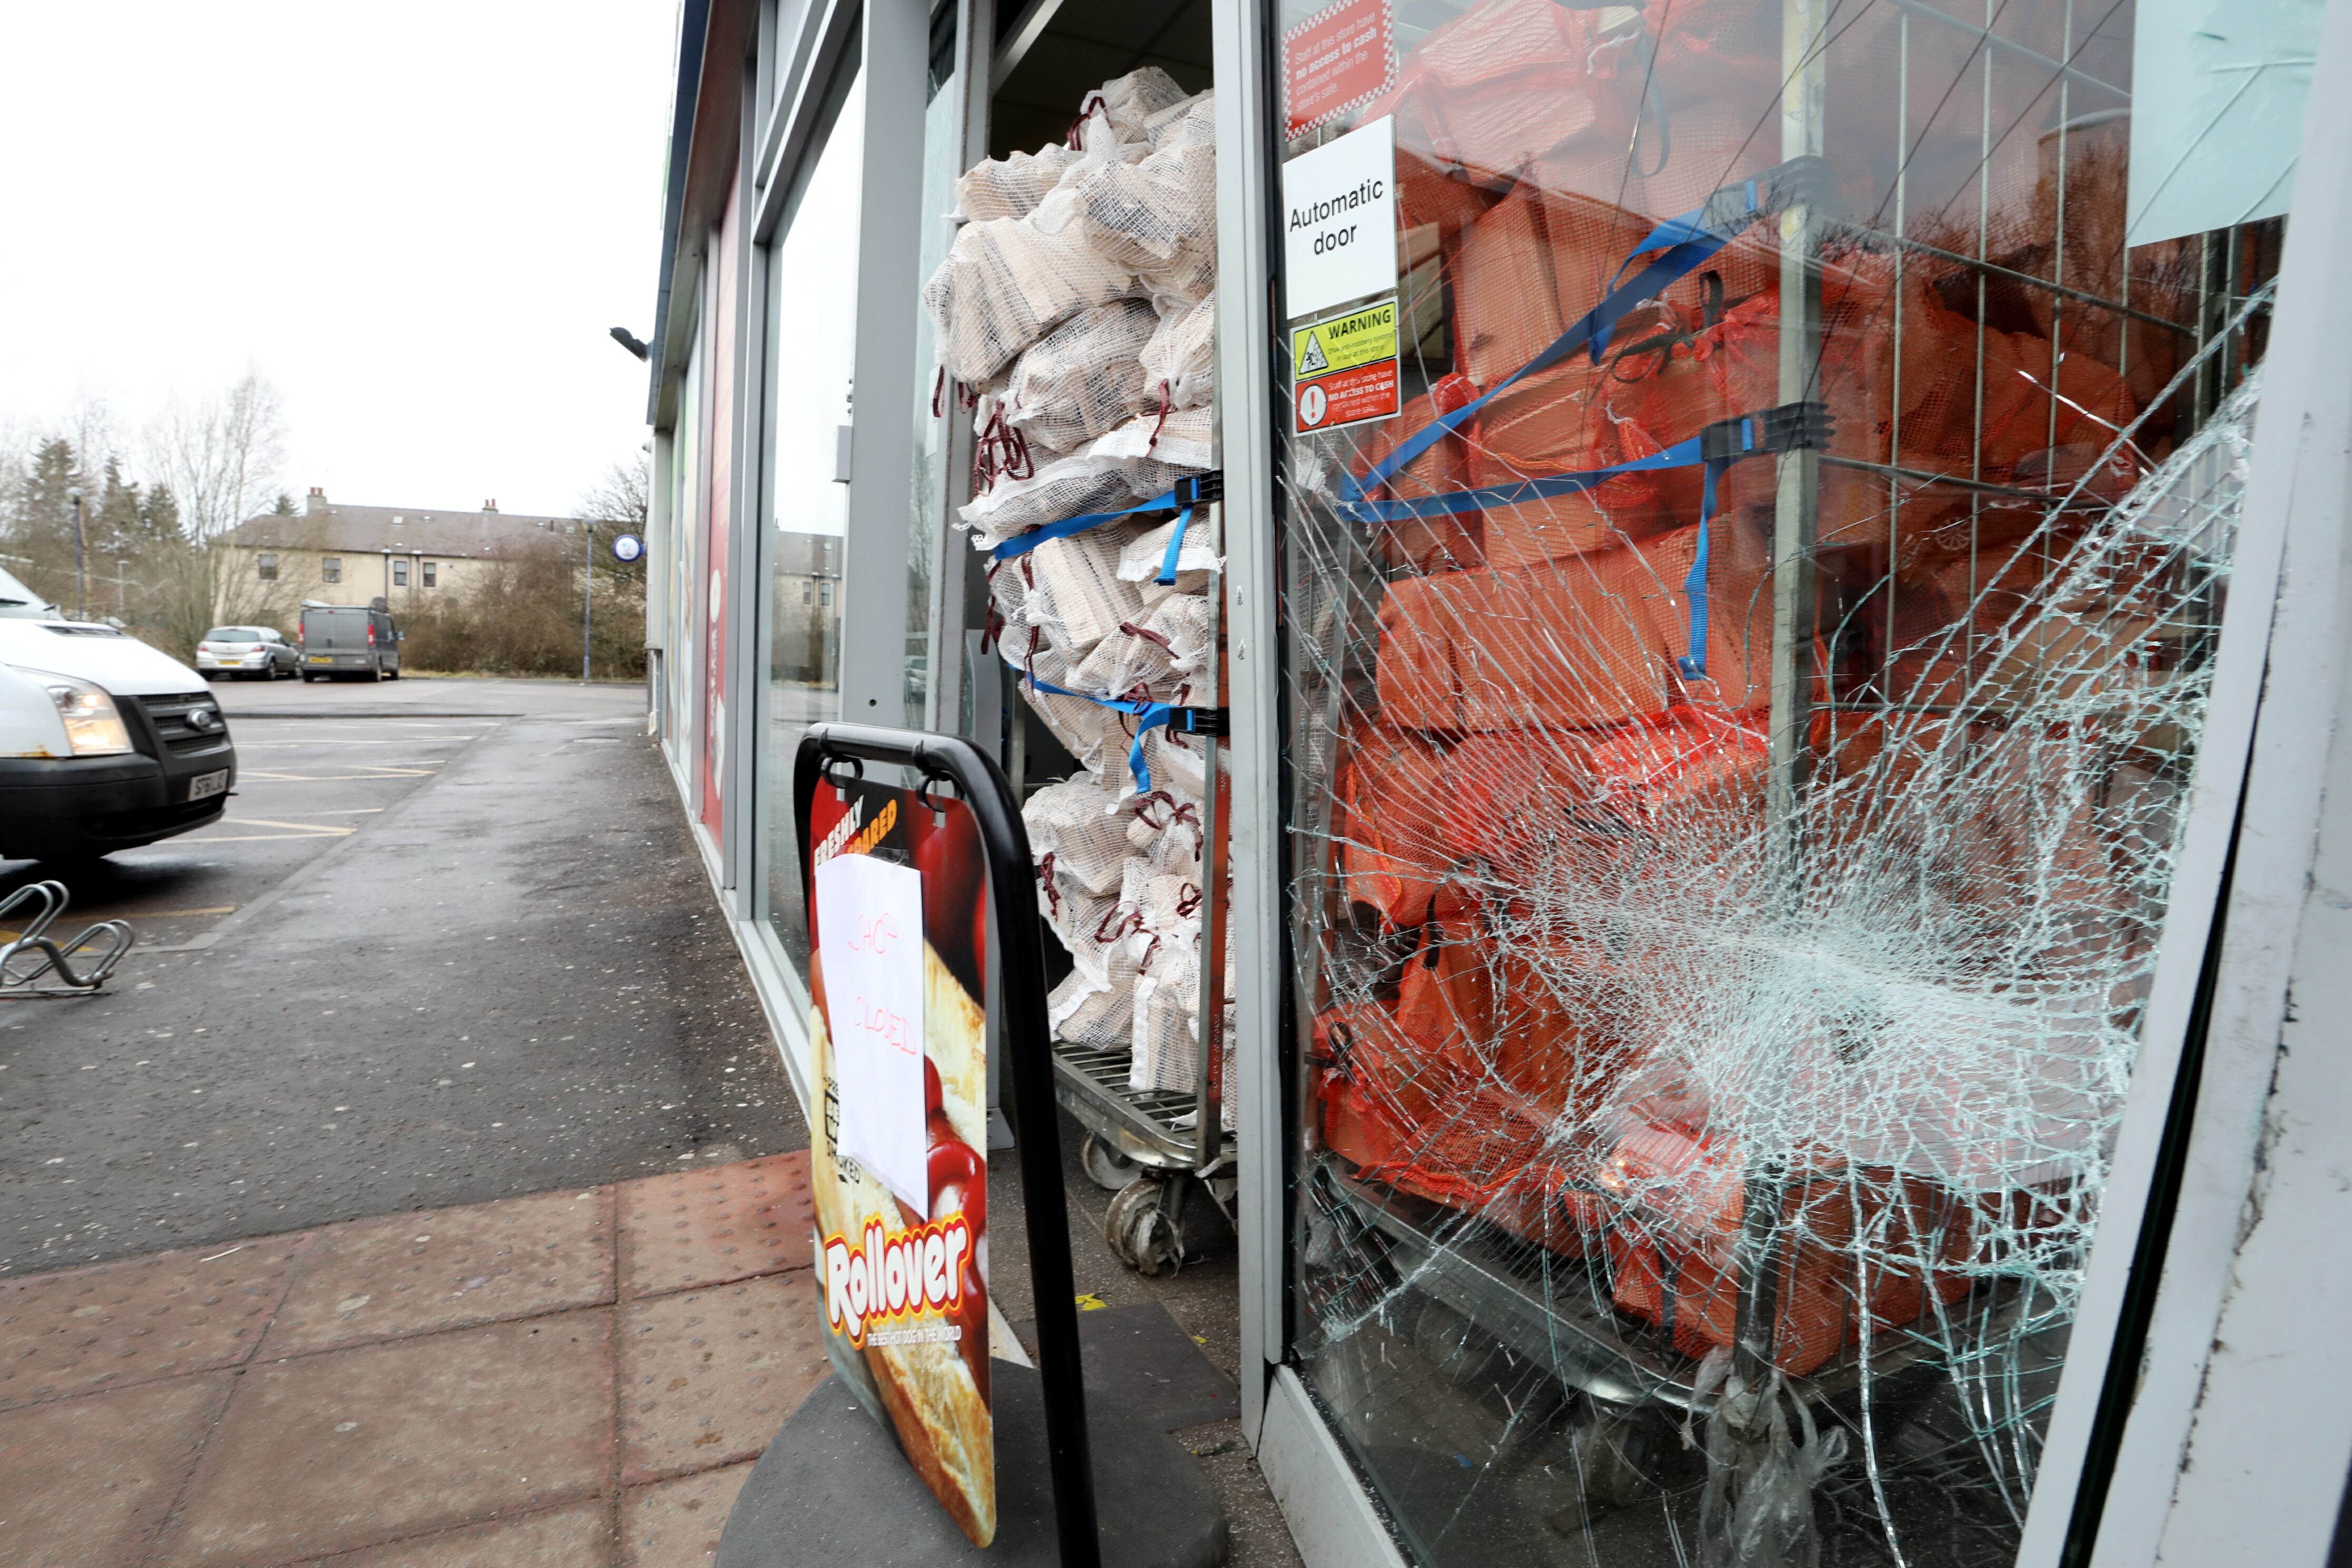 Attempted break in at the Scotmid co op in Coupar Angus